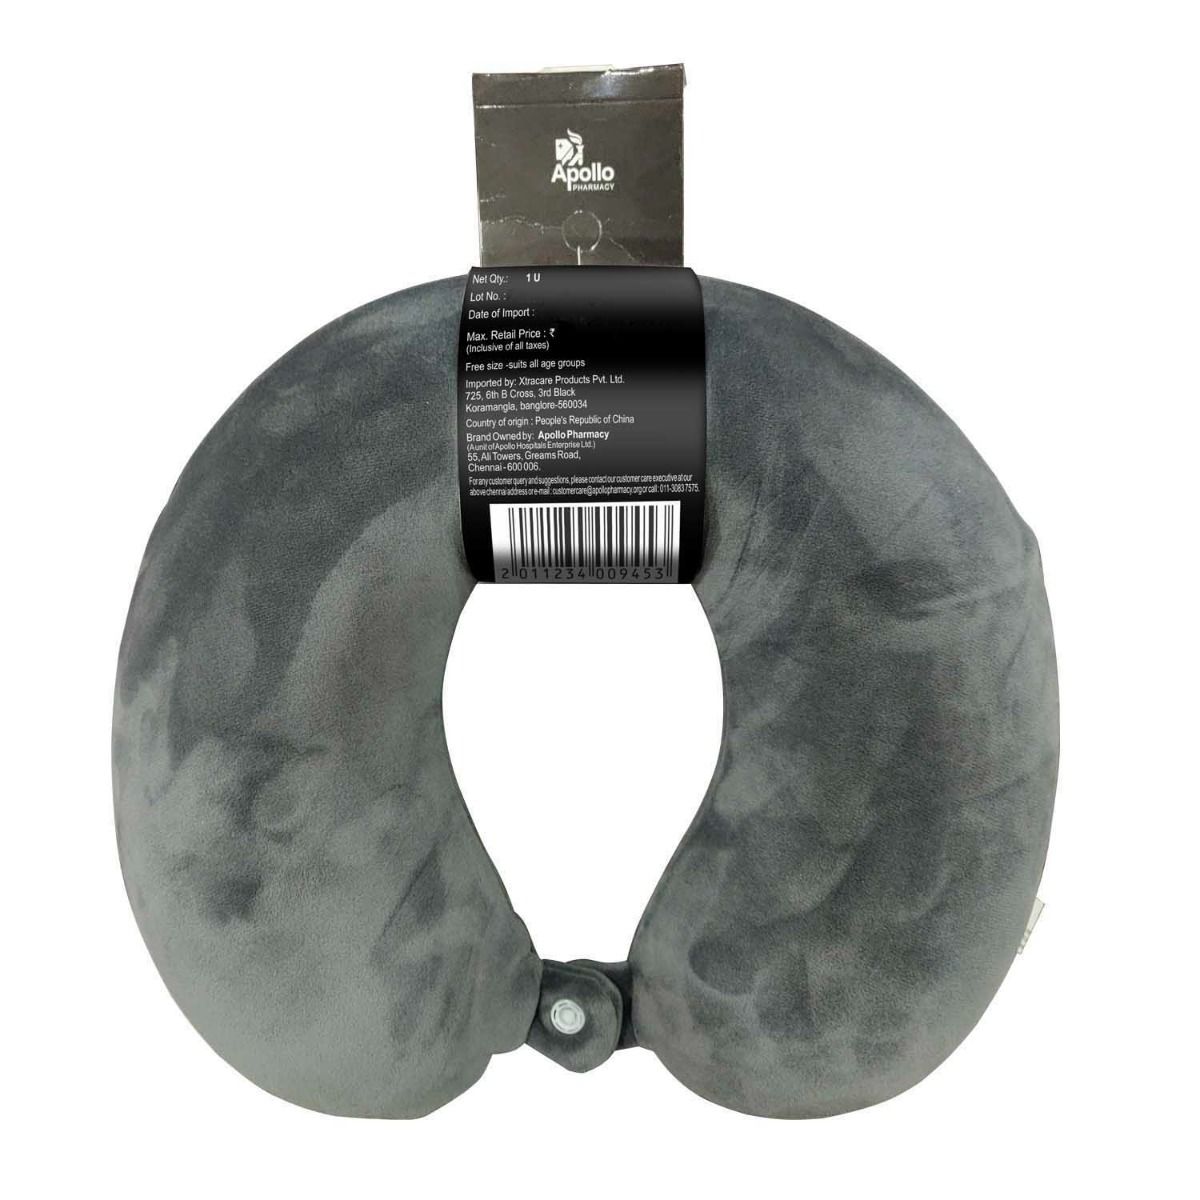 Apollo Pharmacy Neck Pillow, 1 Count, Pack of 1 